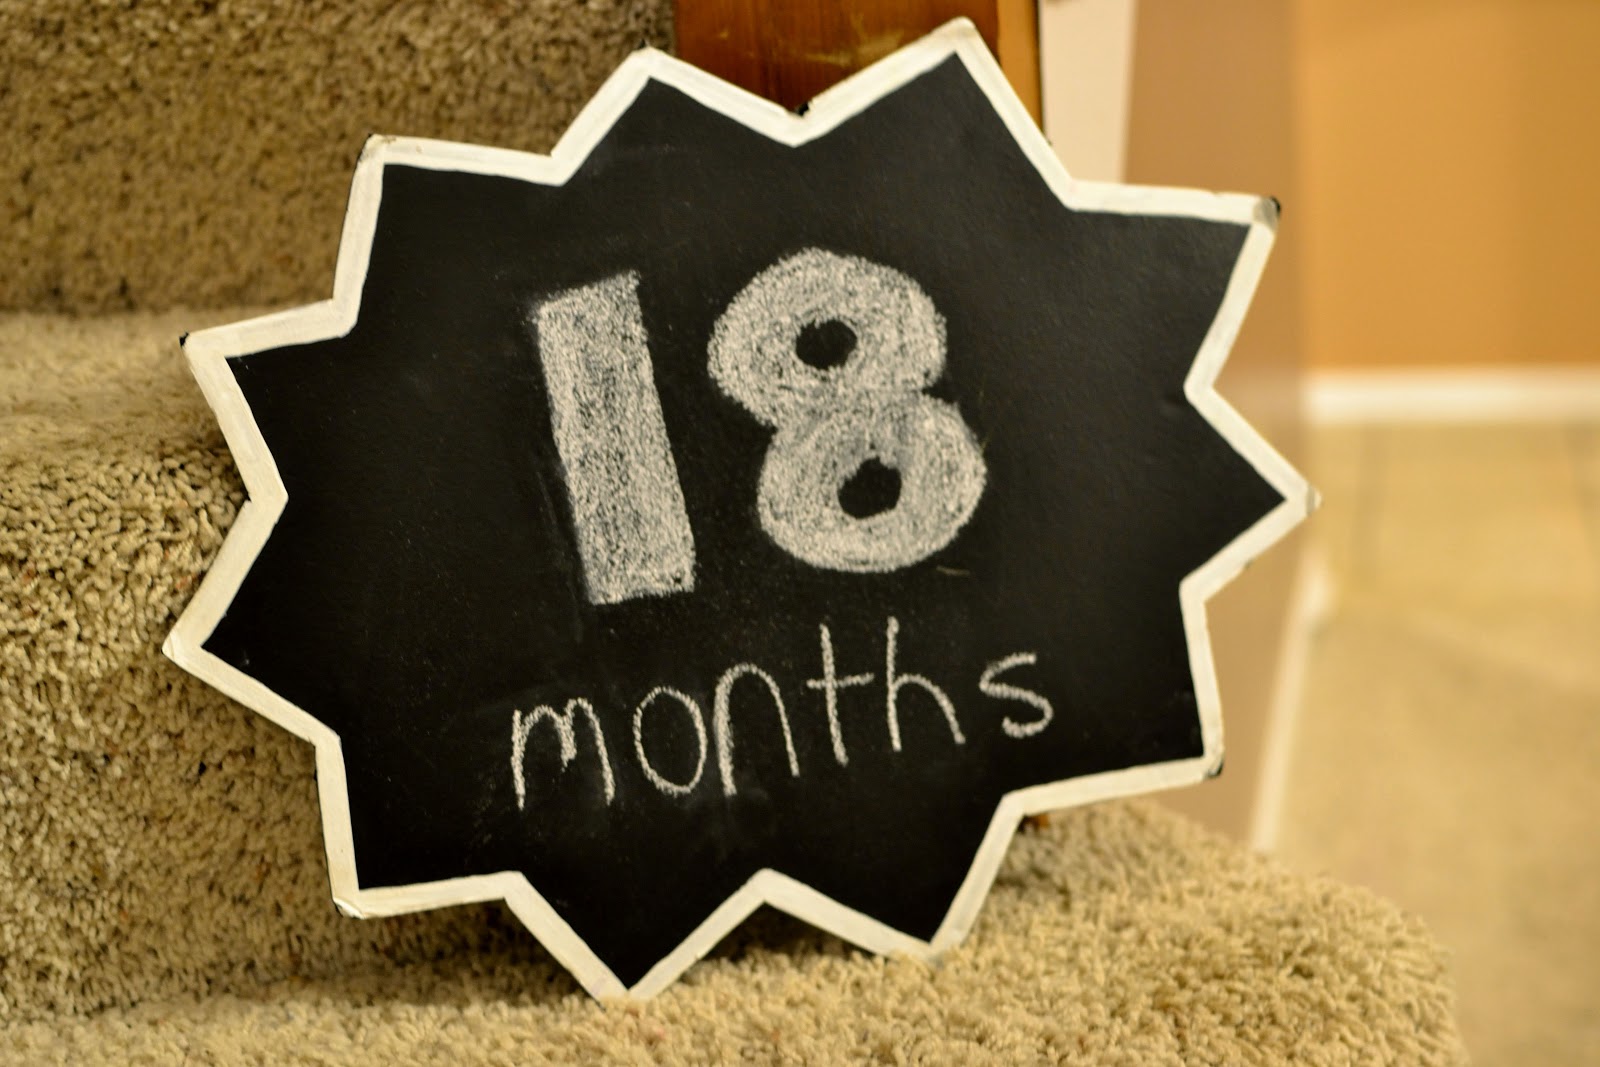 18 months is how many days